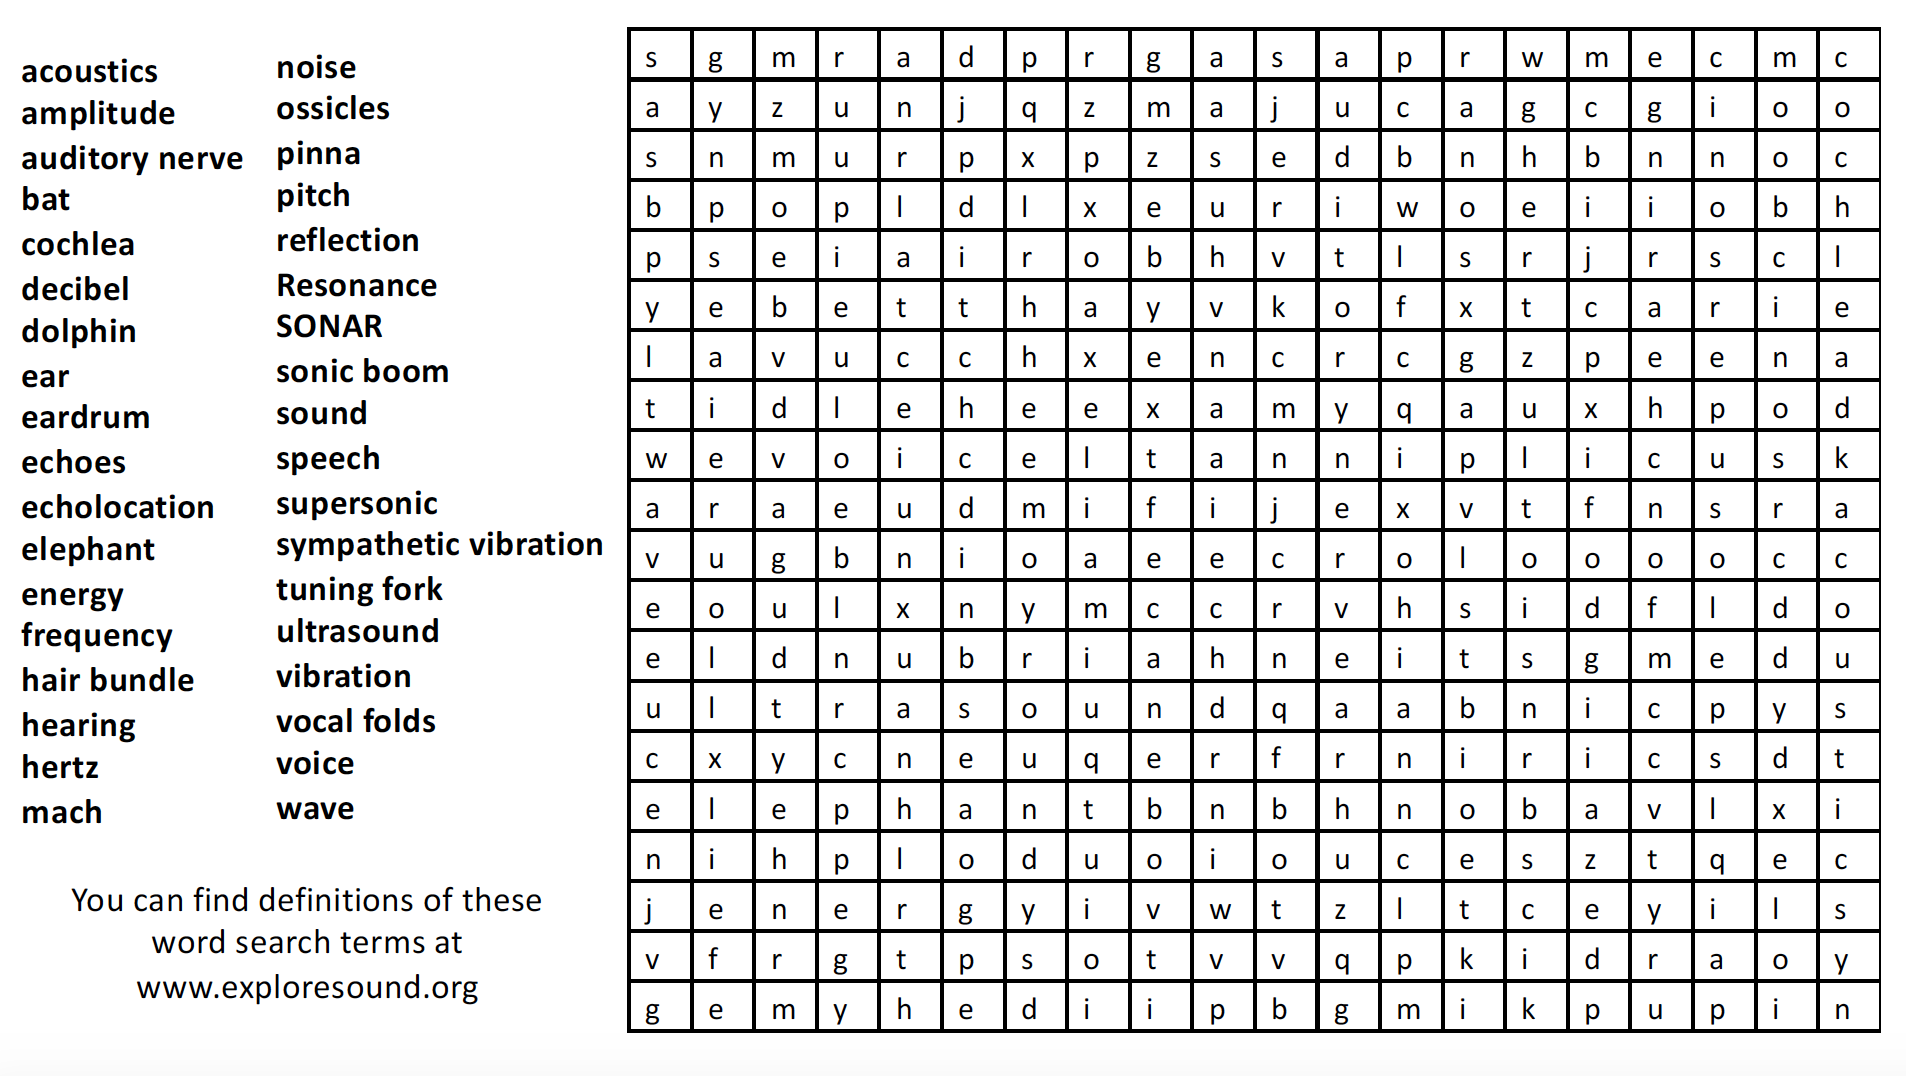 acoustics word search